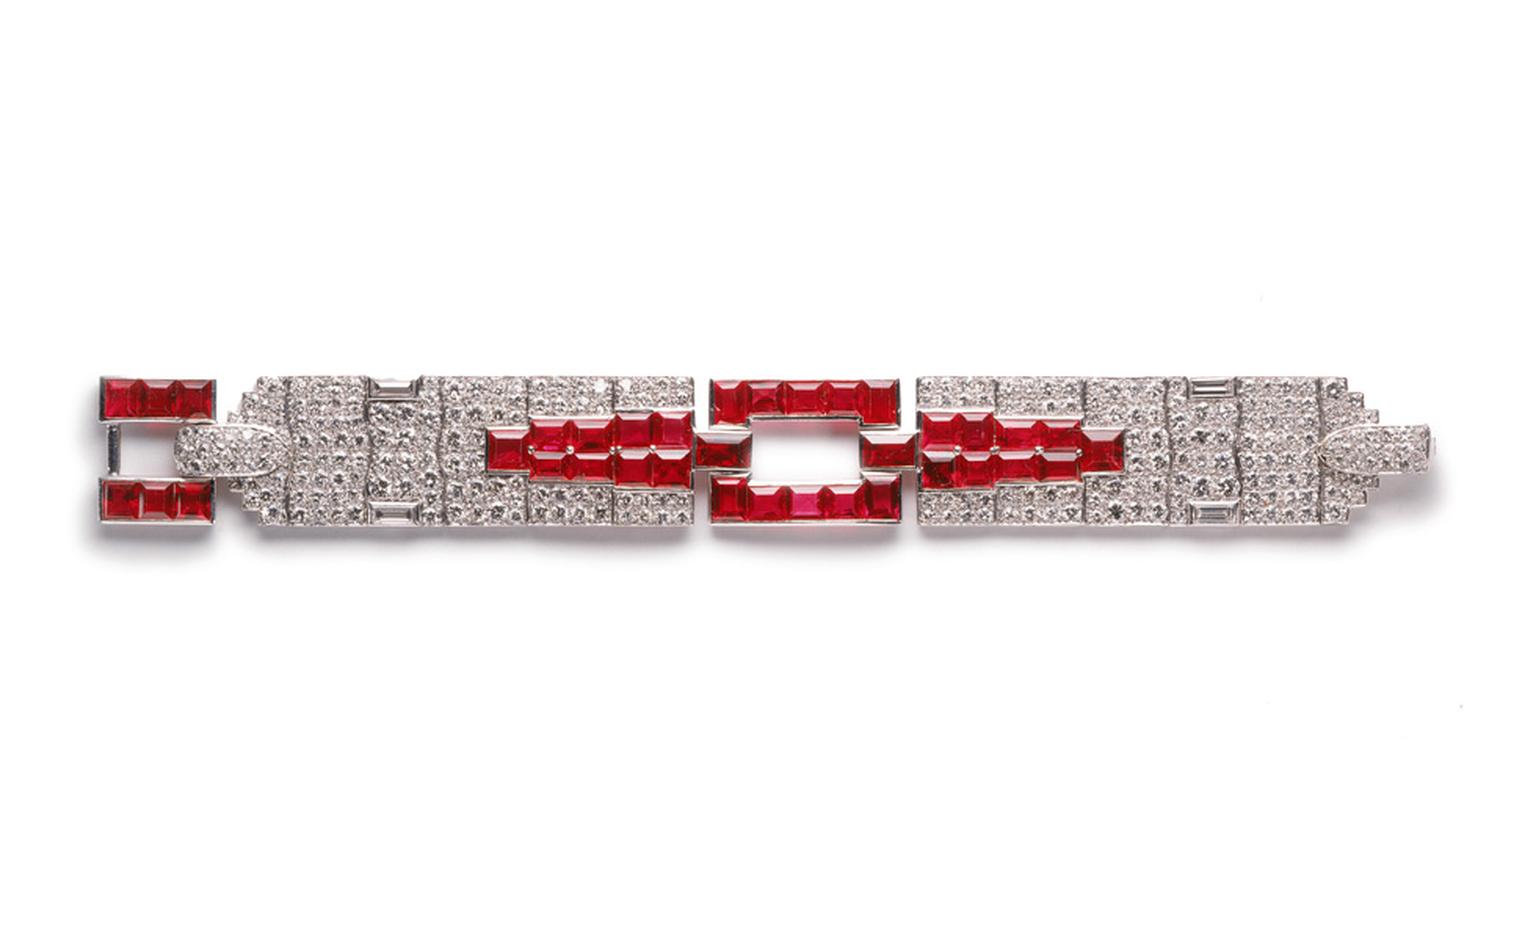 1929 Cartier New York diamond and ruby bracelet made as a special commission and now worn by Madonna at the Venice Film Festival and on the set of W.E. by actress Andrea Riseborough playing Wallis Simpson.